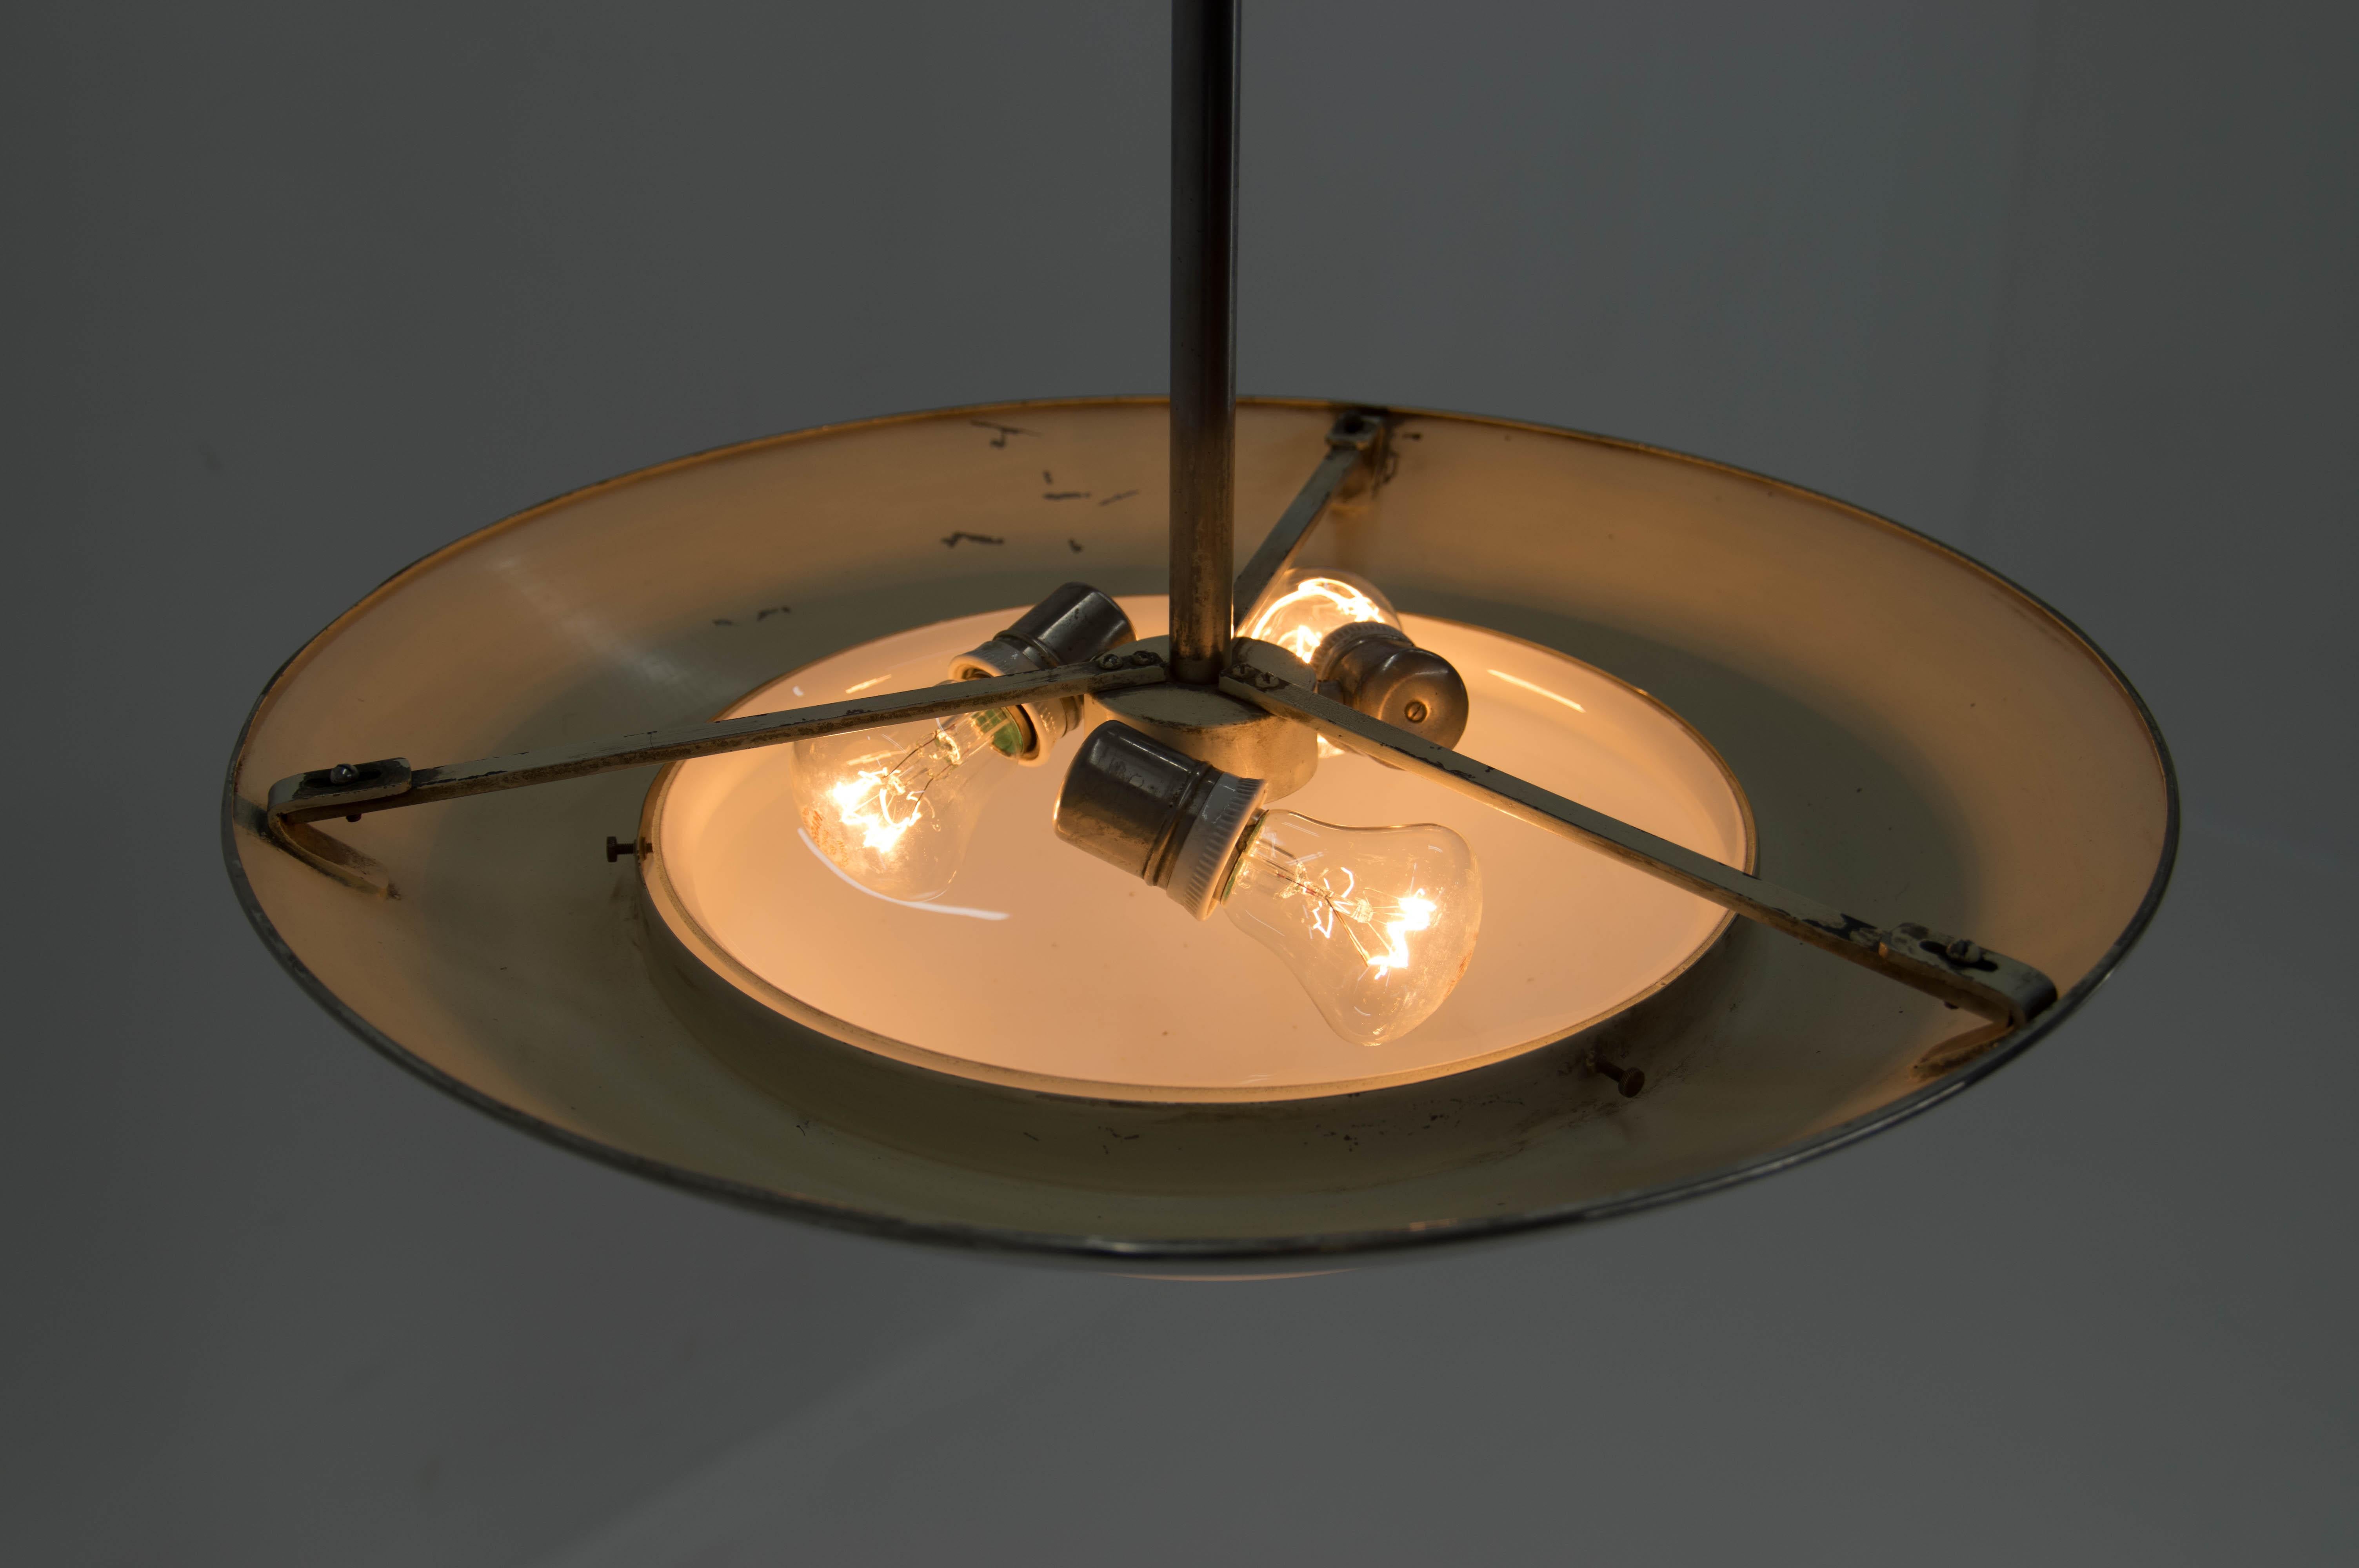 Czech Nickel-Plated Art Deco or Bauhaus Chandelier by Franta Anyz, 1920s For Sale